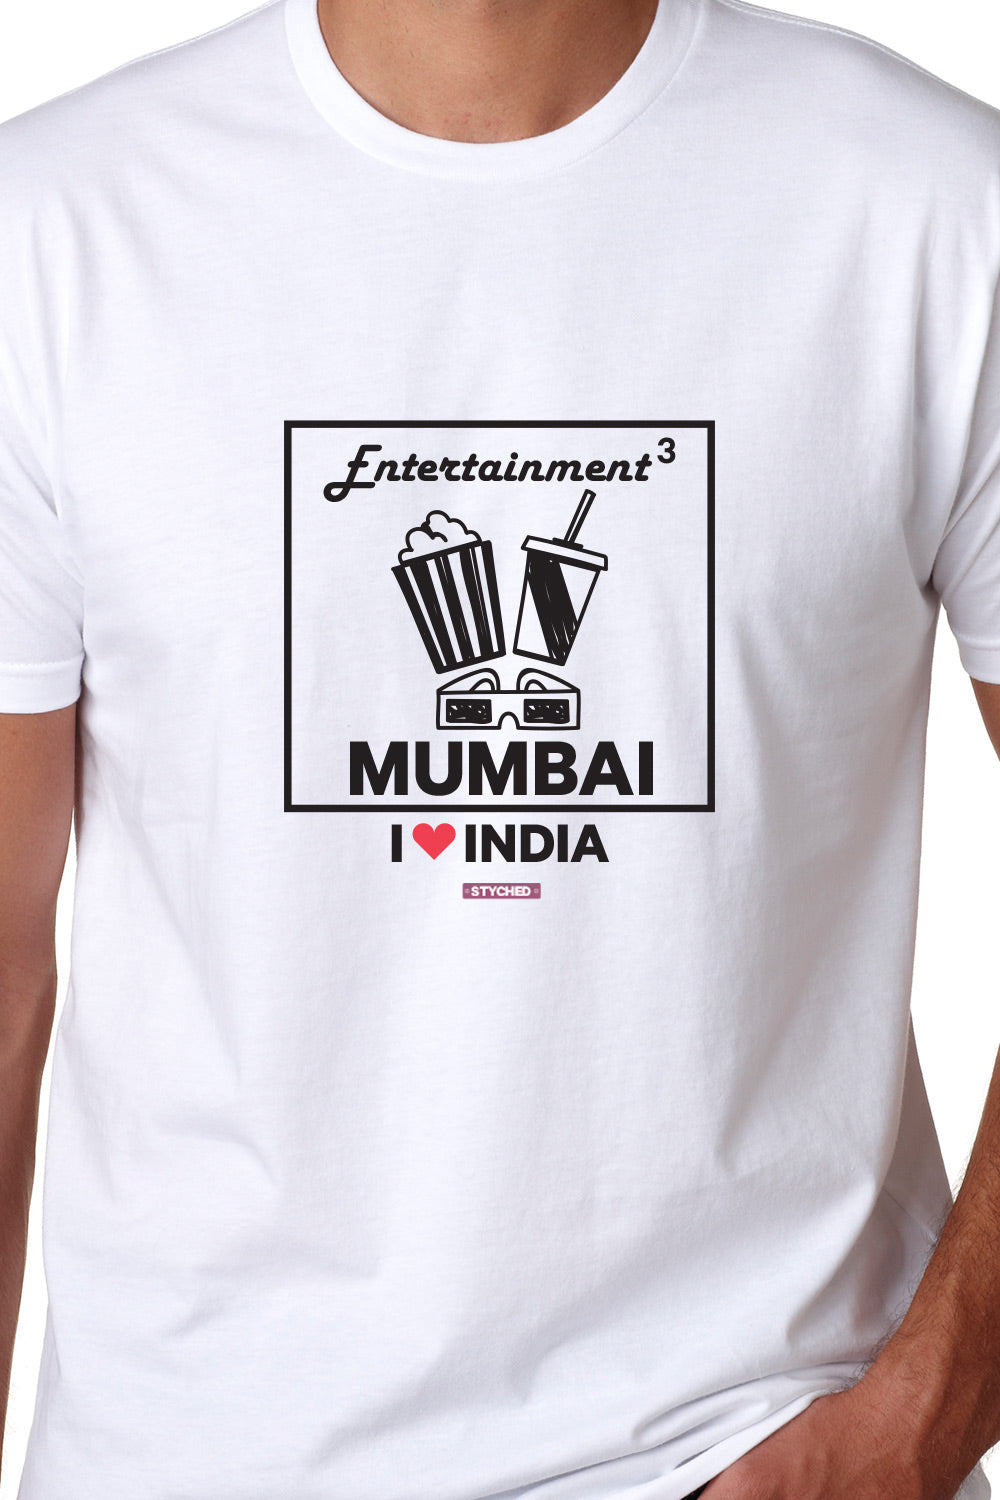 I love Mumbai - Styched in India Graphic T-Shirt White Color